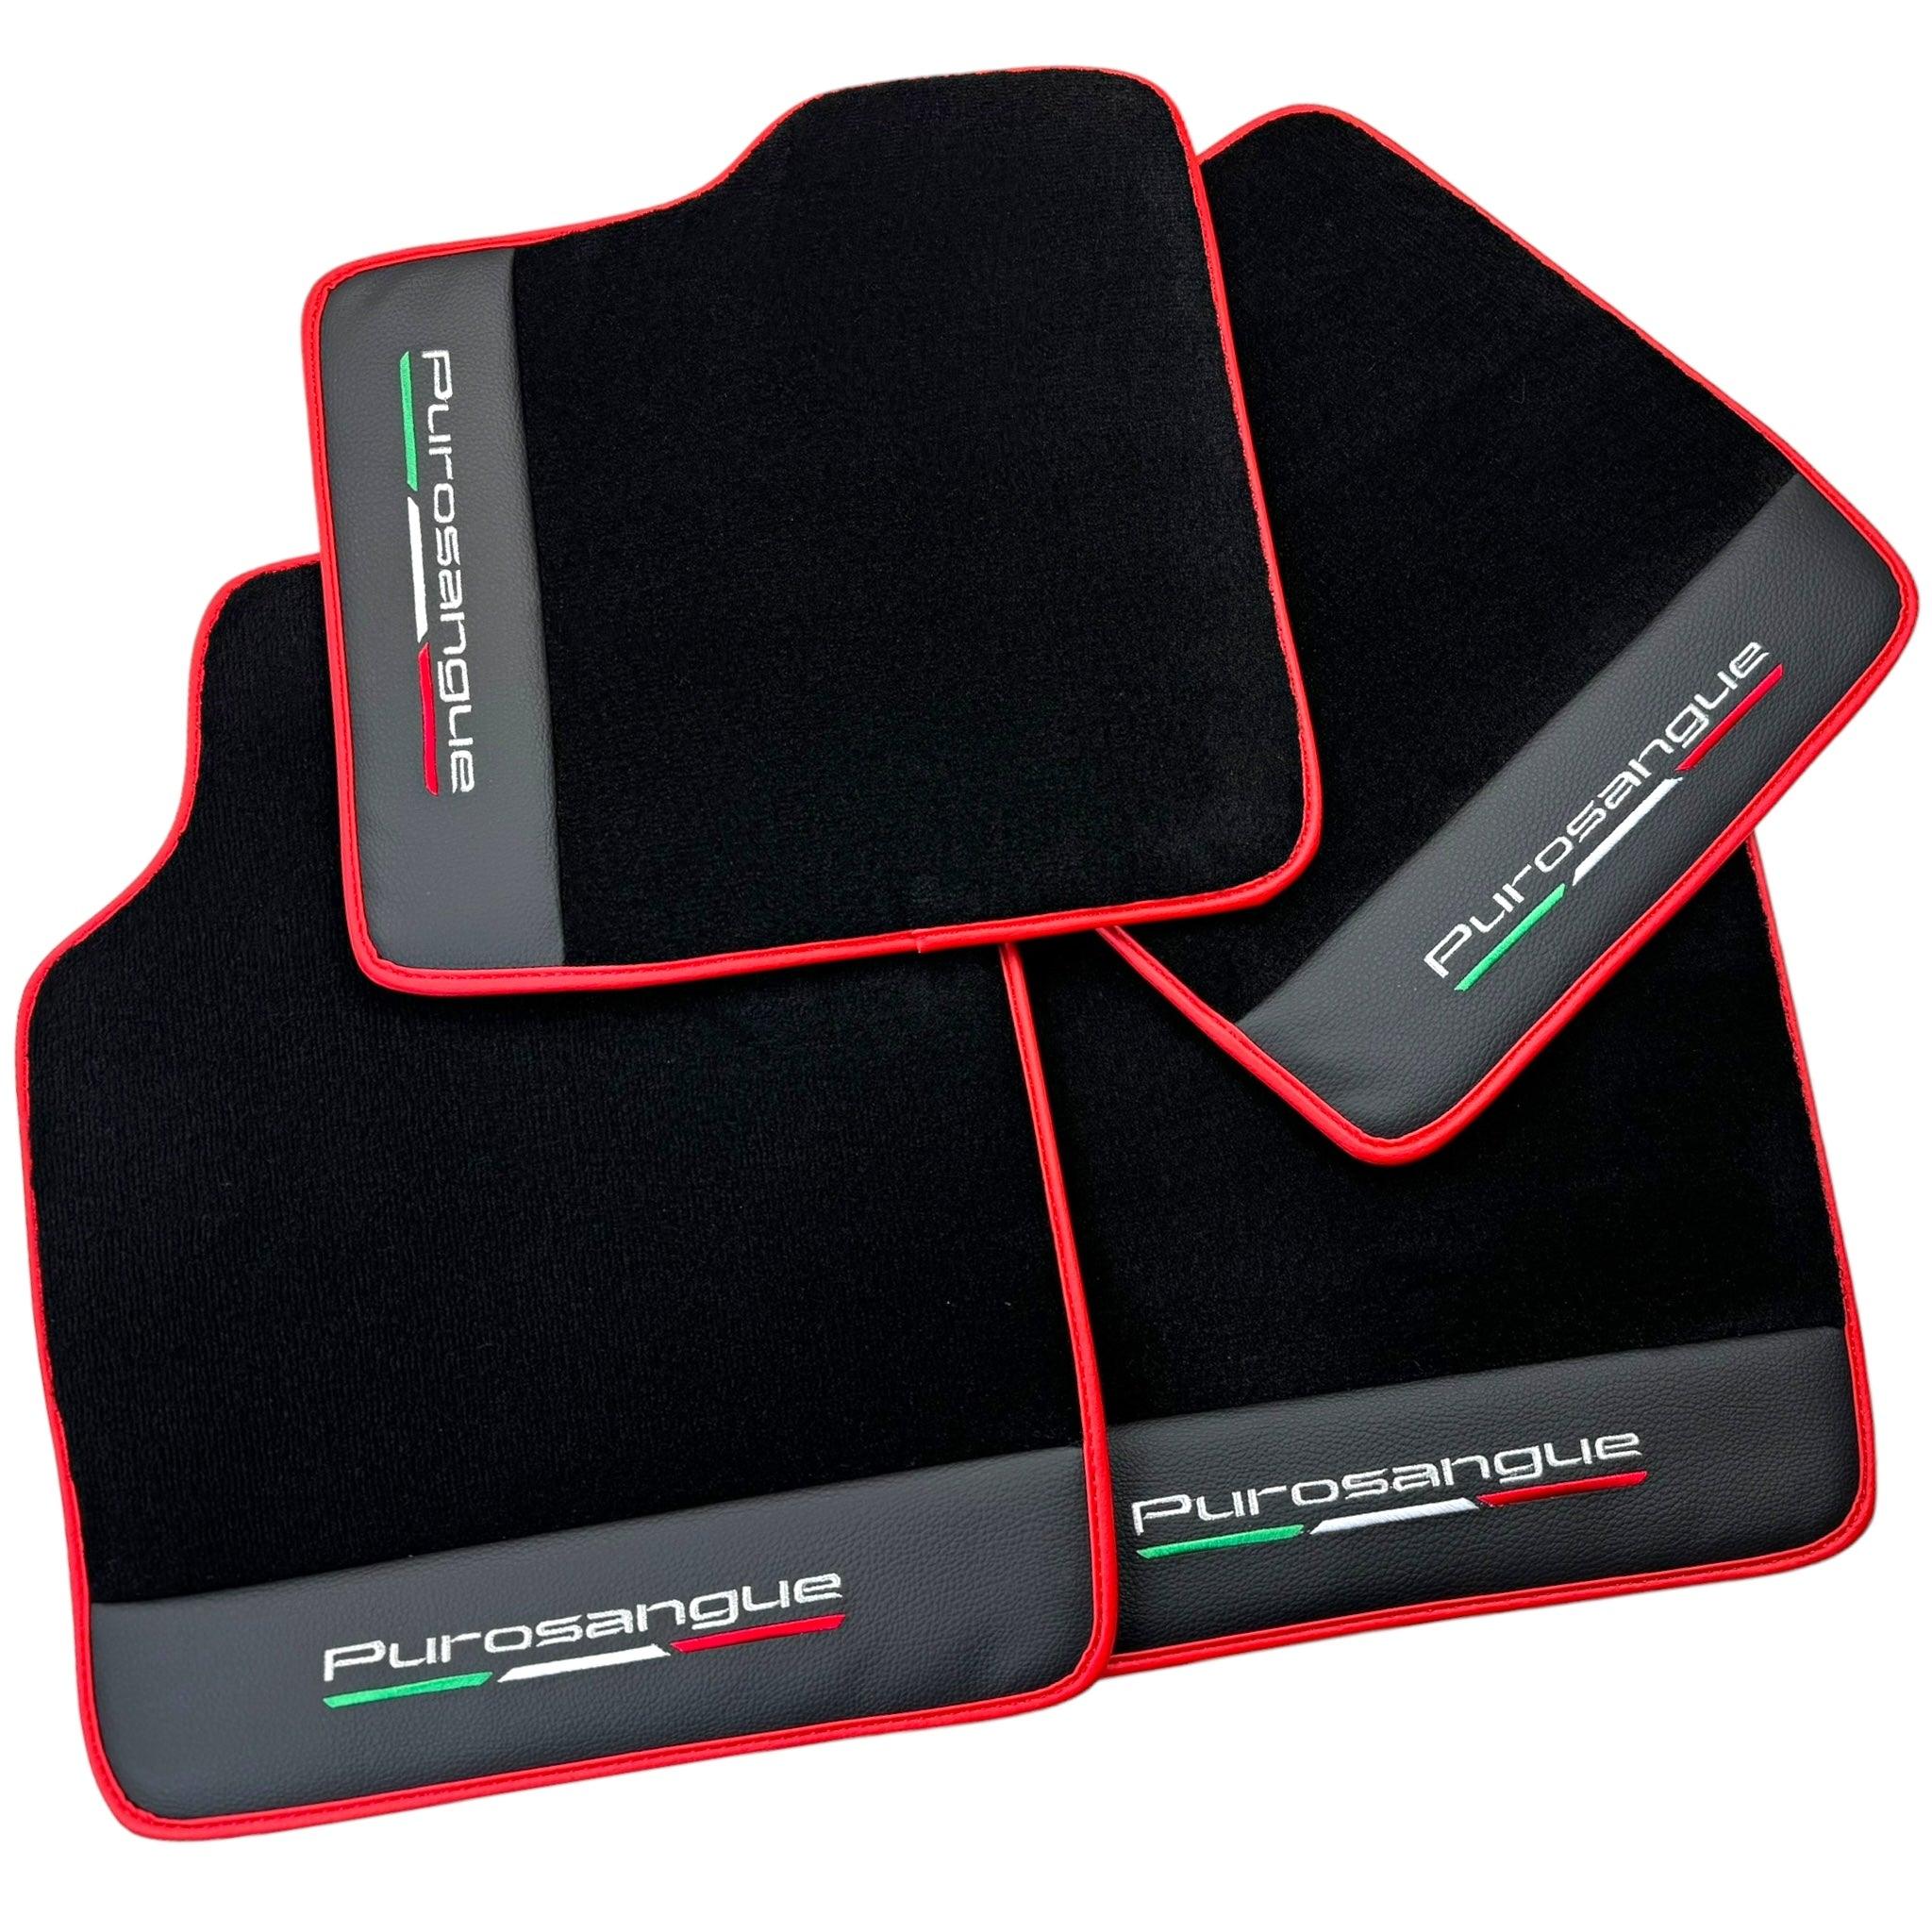 Black Floor Mats for Ferrari Purosangue with Leather and Red Trim | Italian Edition - AutoWin